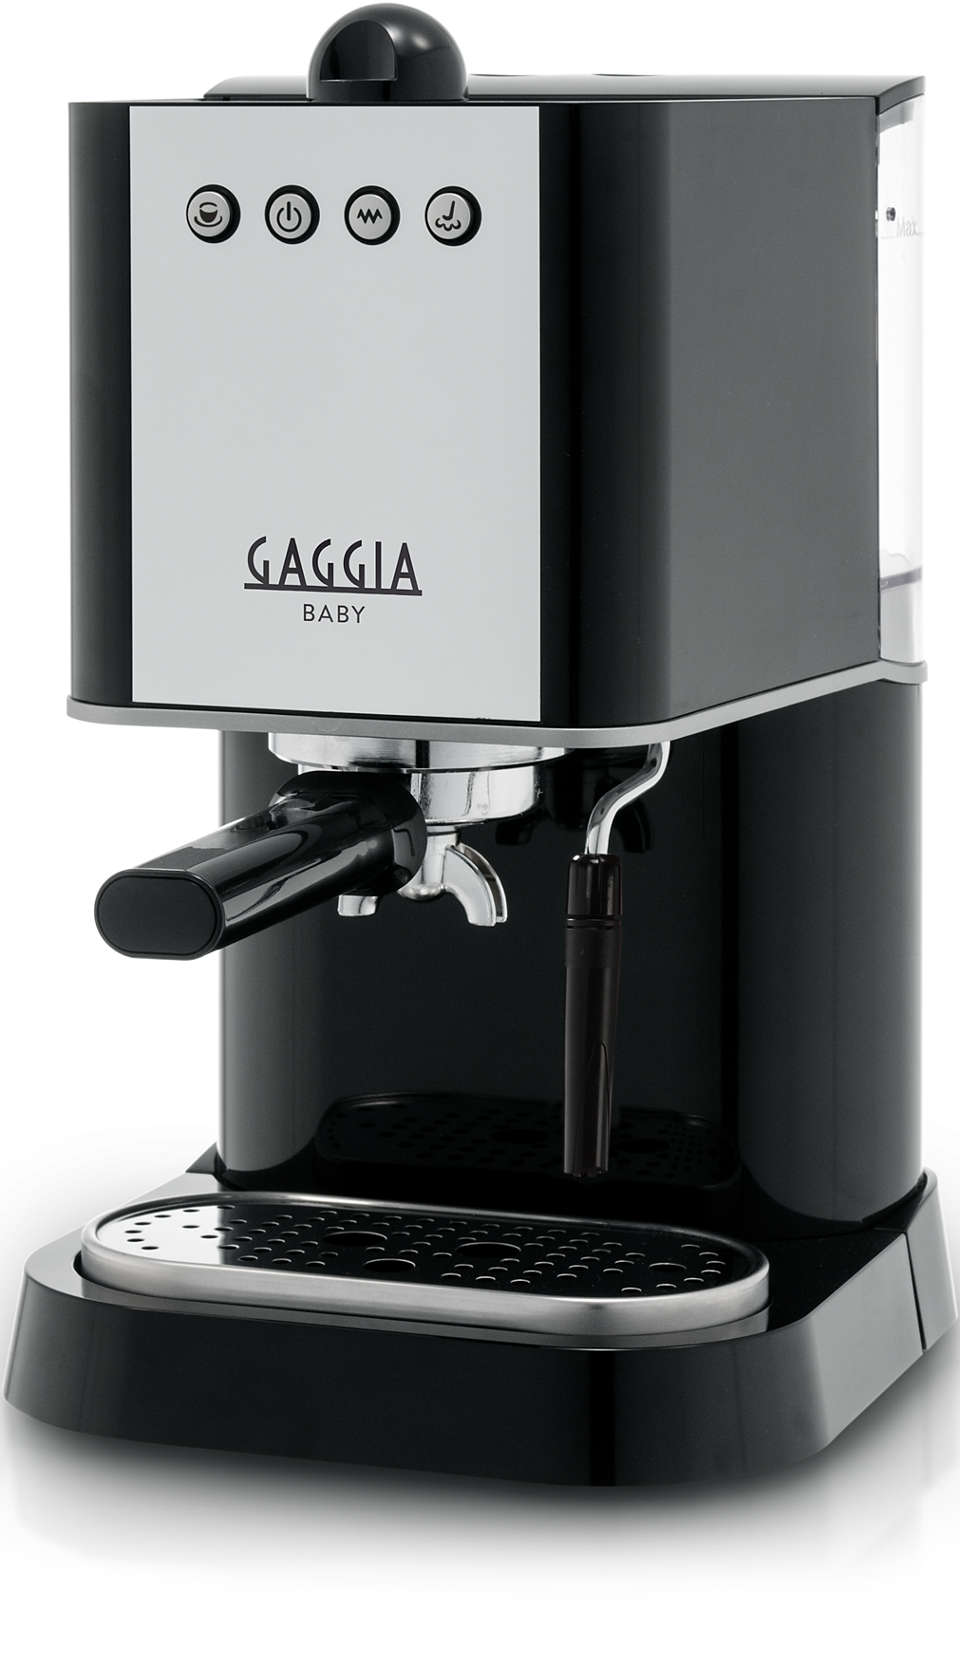 Gaggia's iconic model since 1977